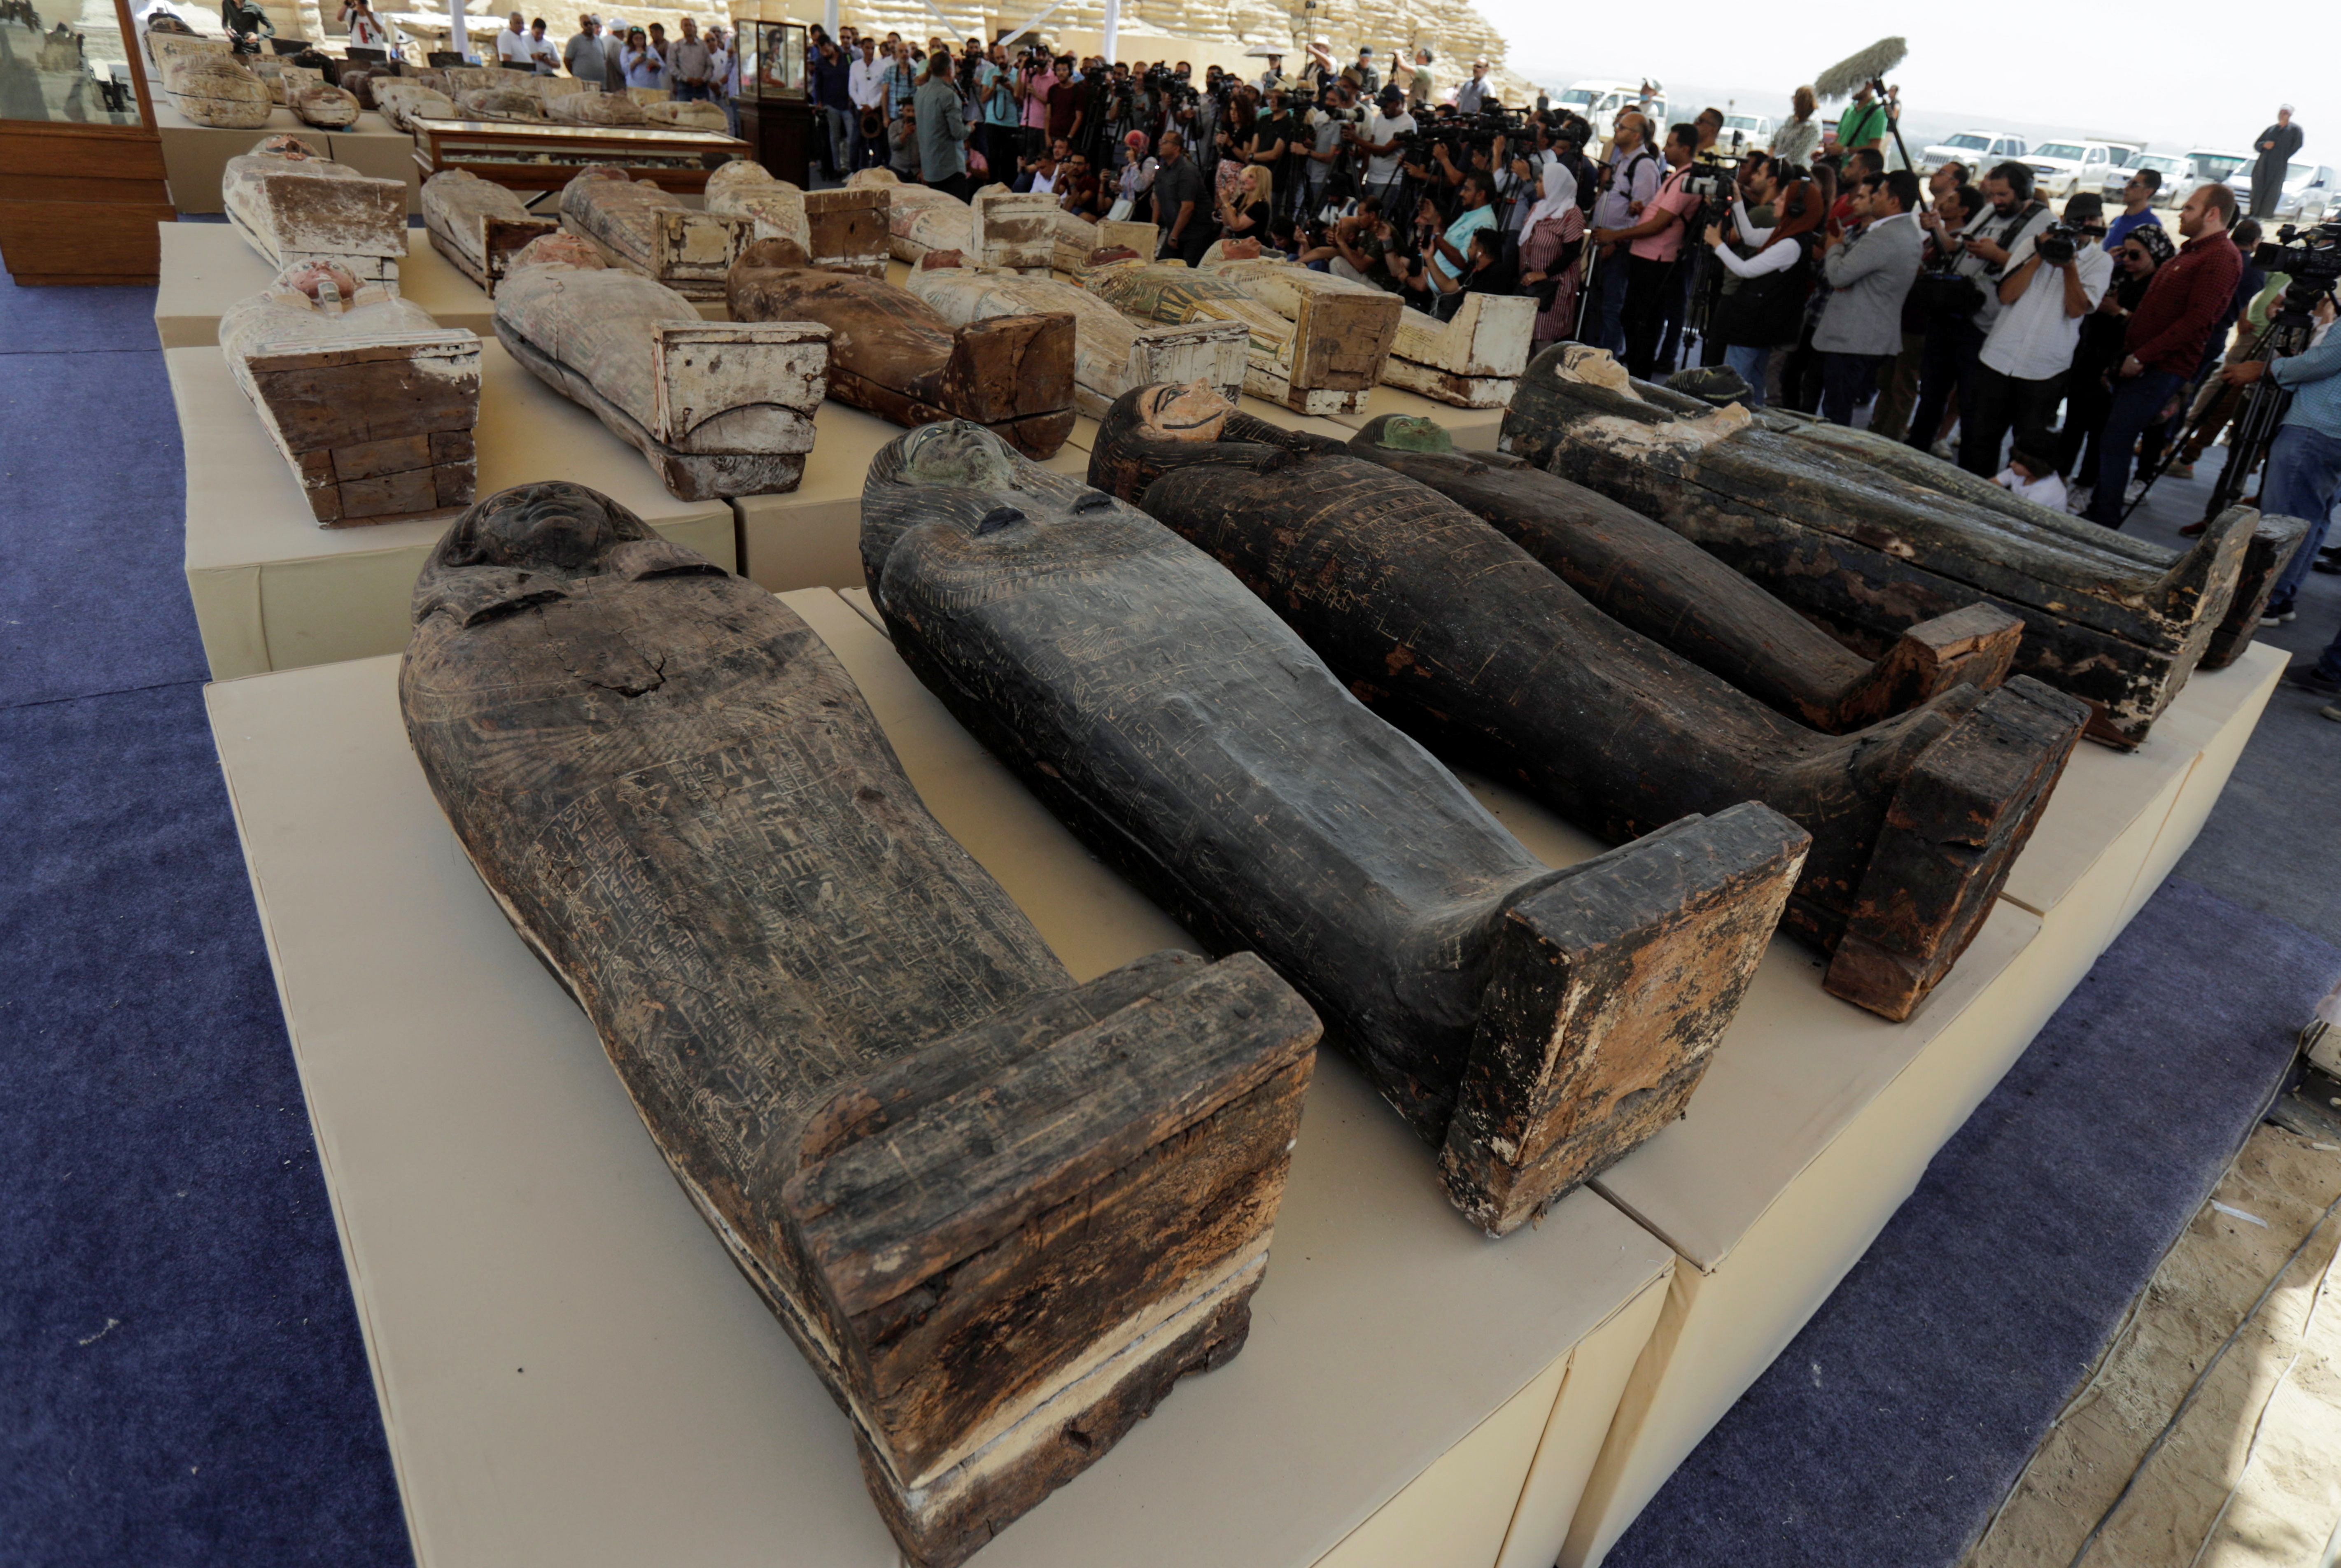 Sarcophaguses from the newly discovered burial site displayed during a presentation in Giza